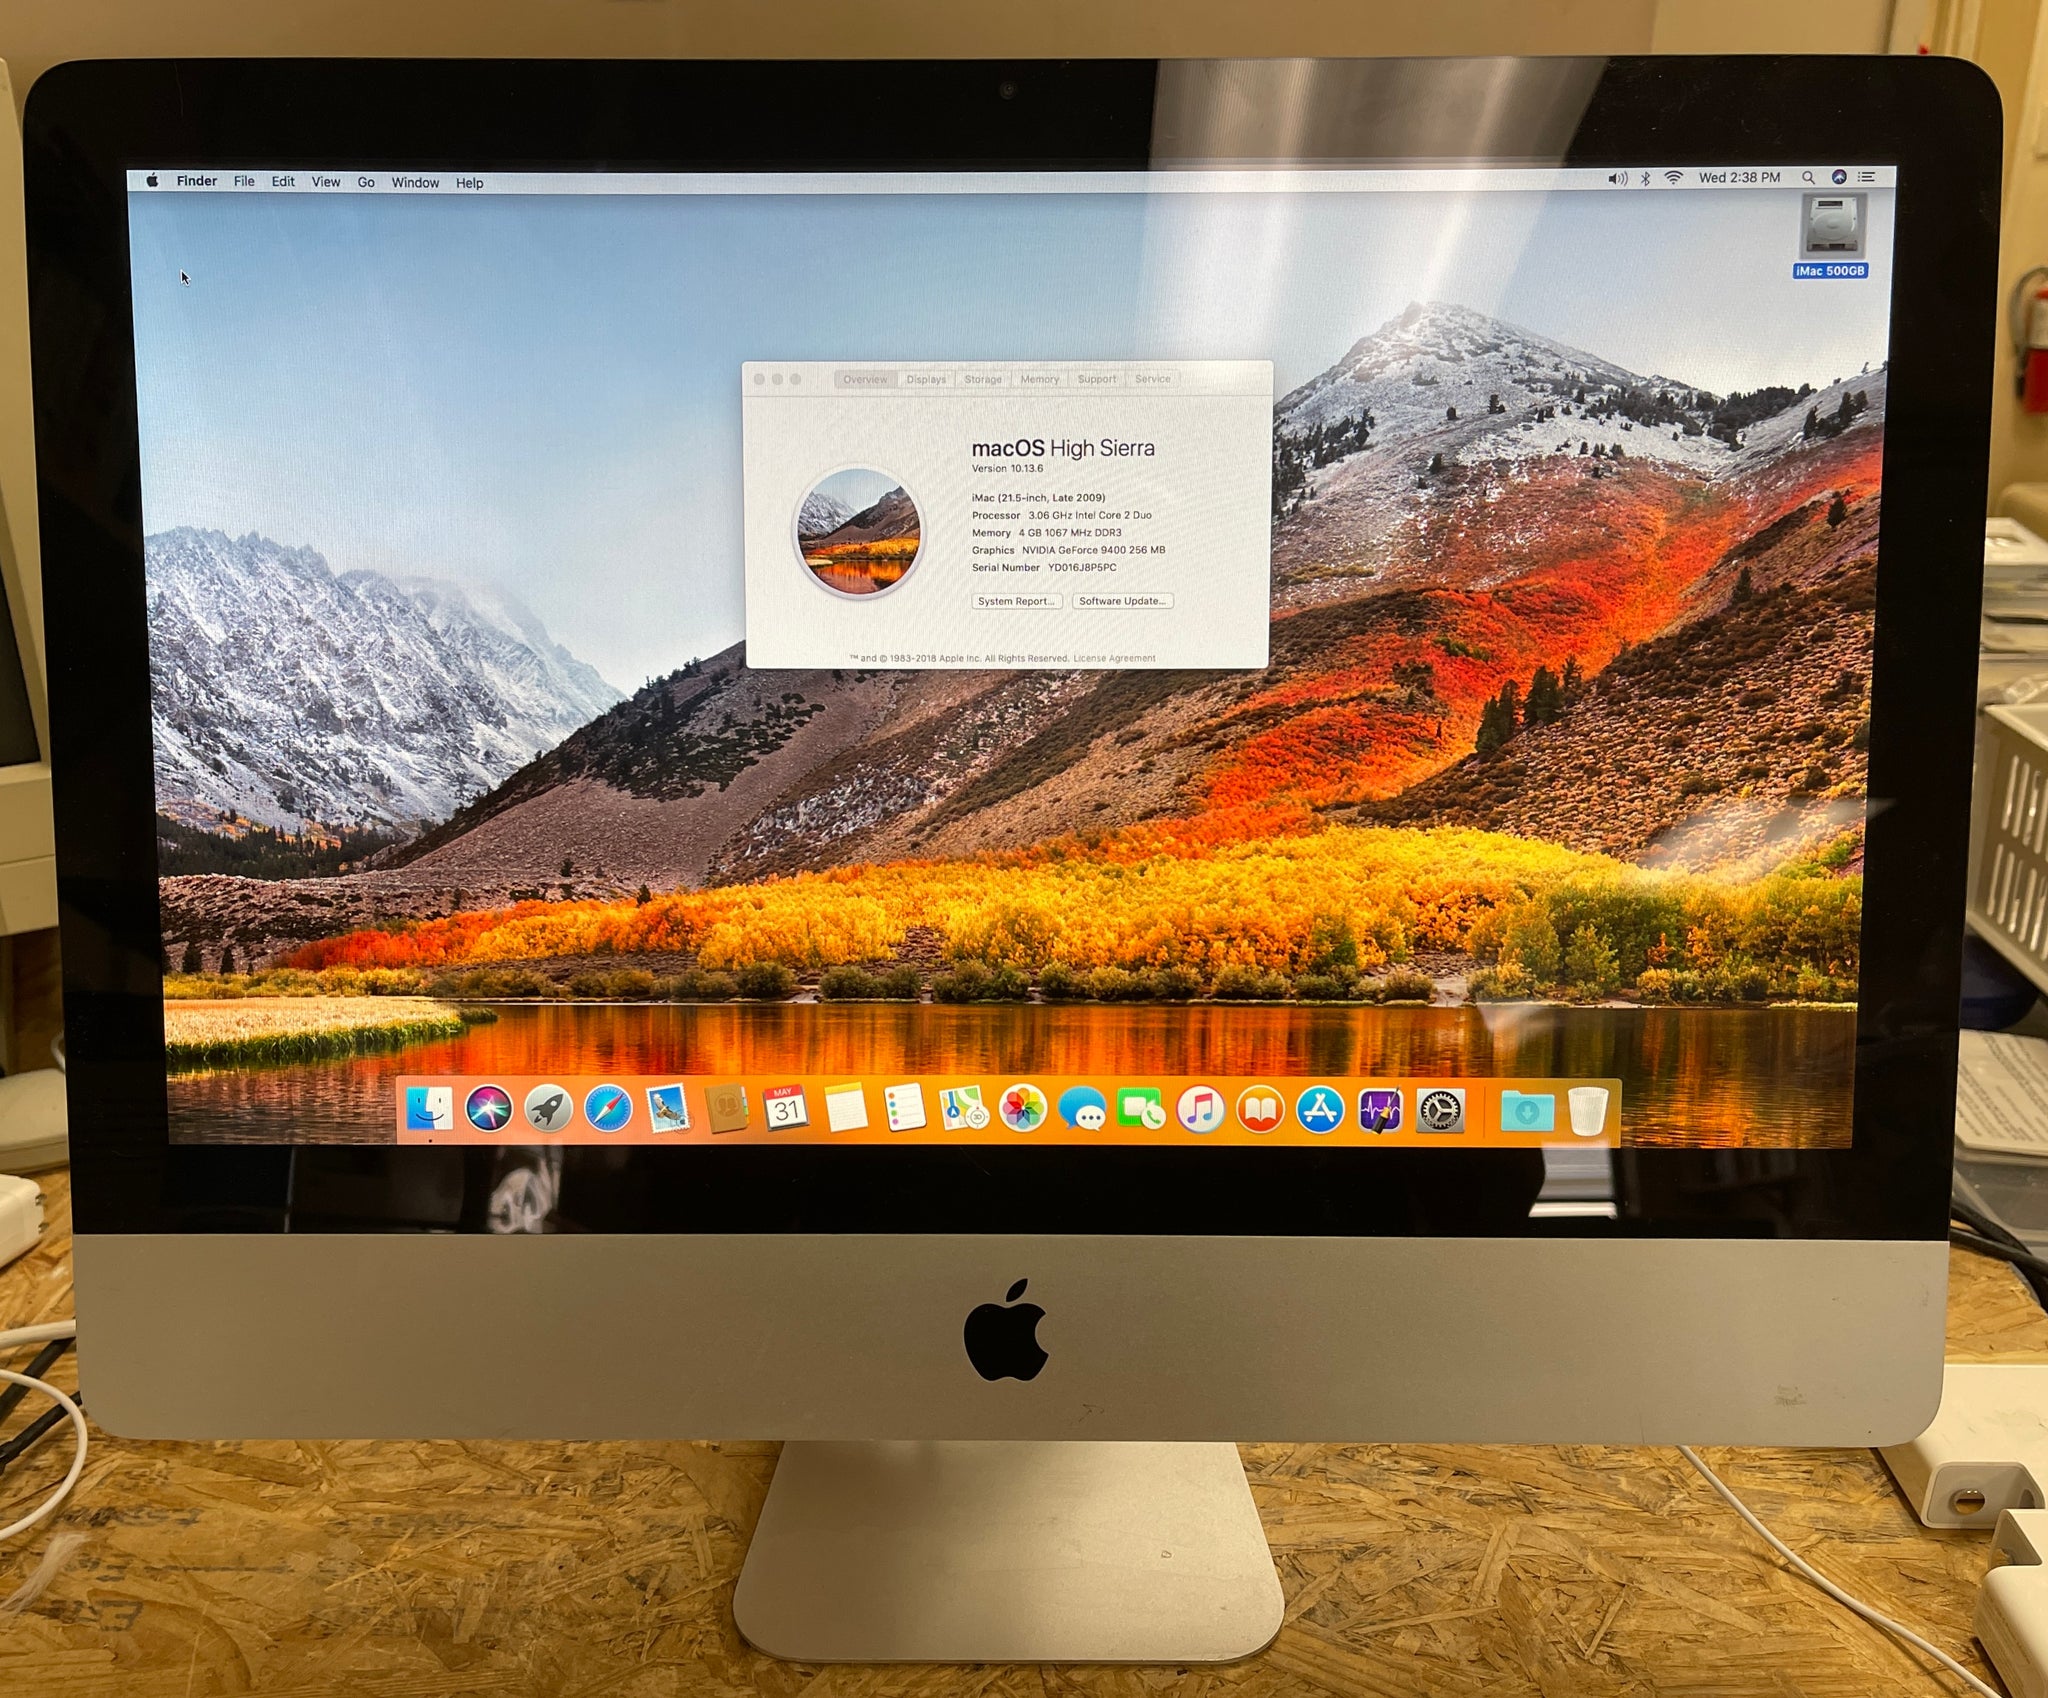 Apple iMac 21.5-inch Late 2009 3.06GHz Intel Core 2 Duo (MB950LL/A 